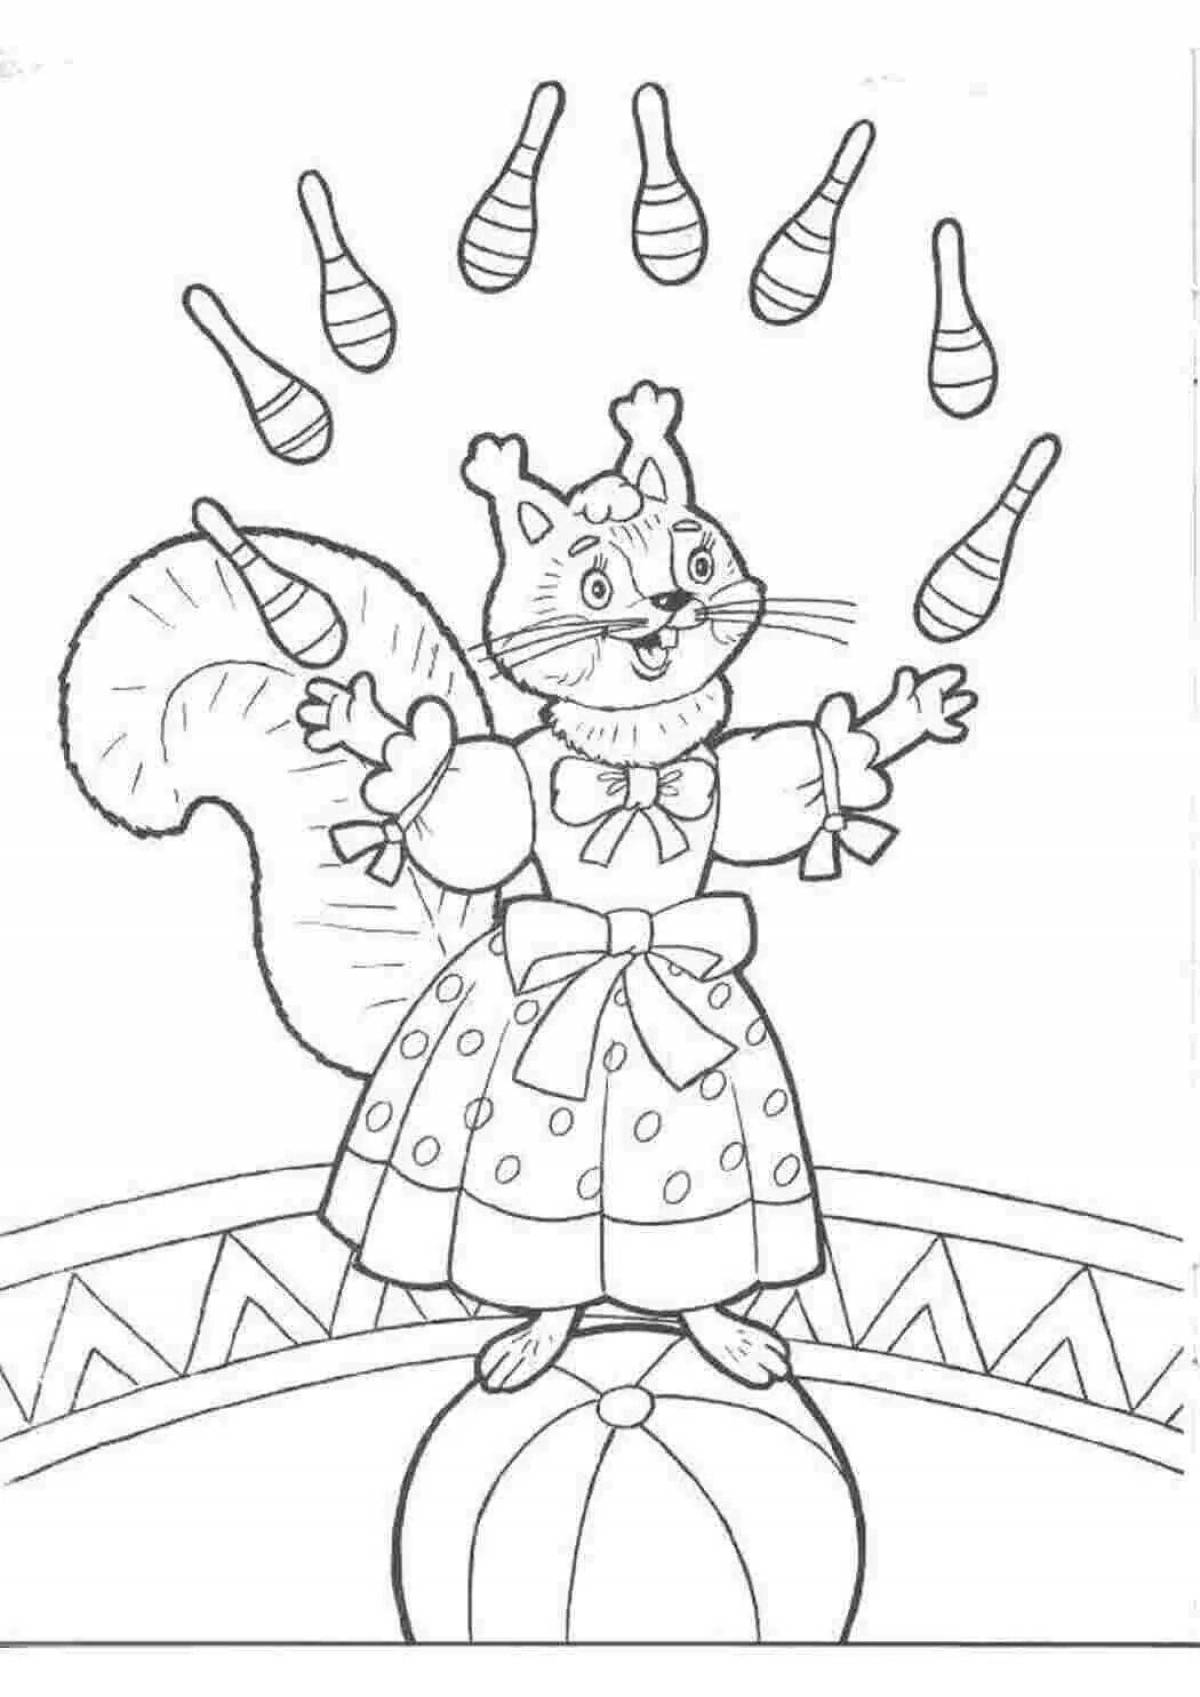 Large puppet theater coloring page